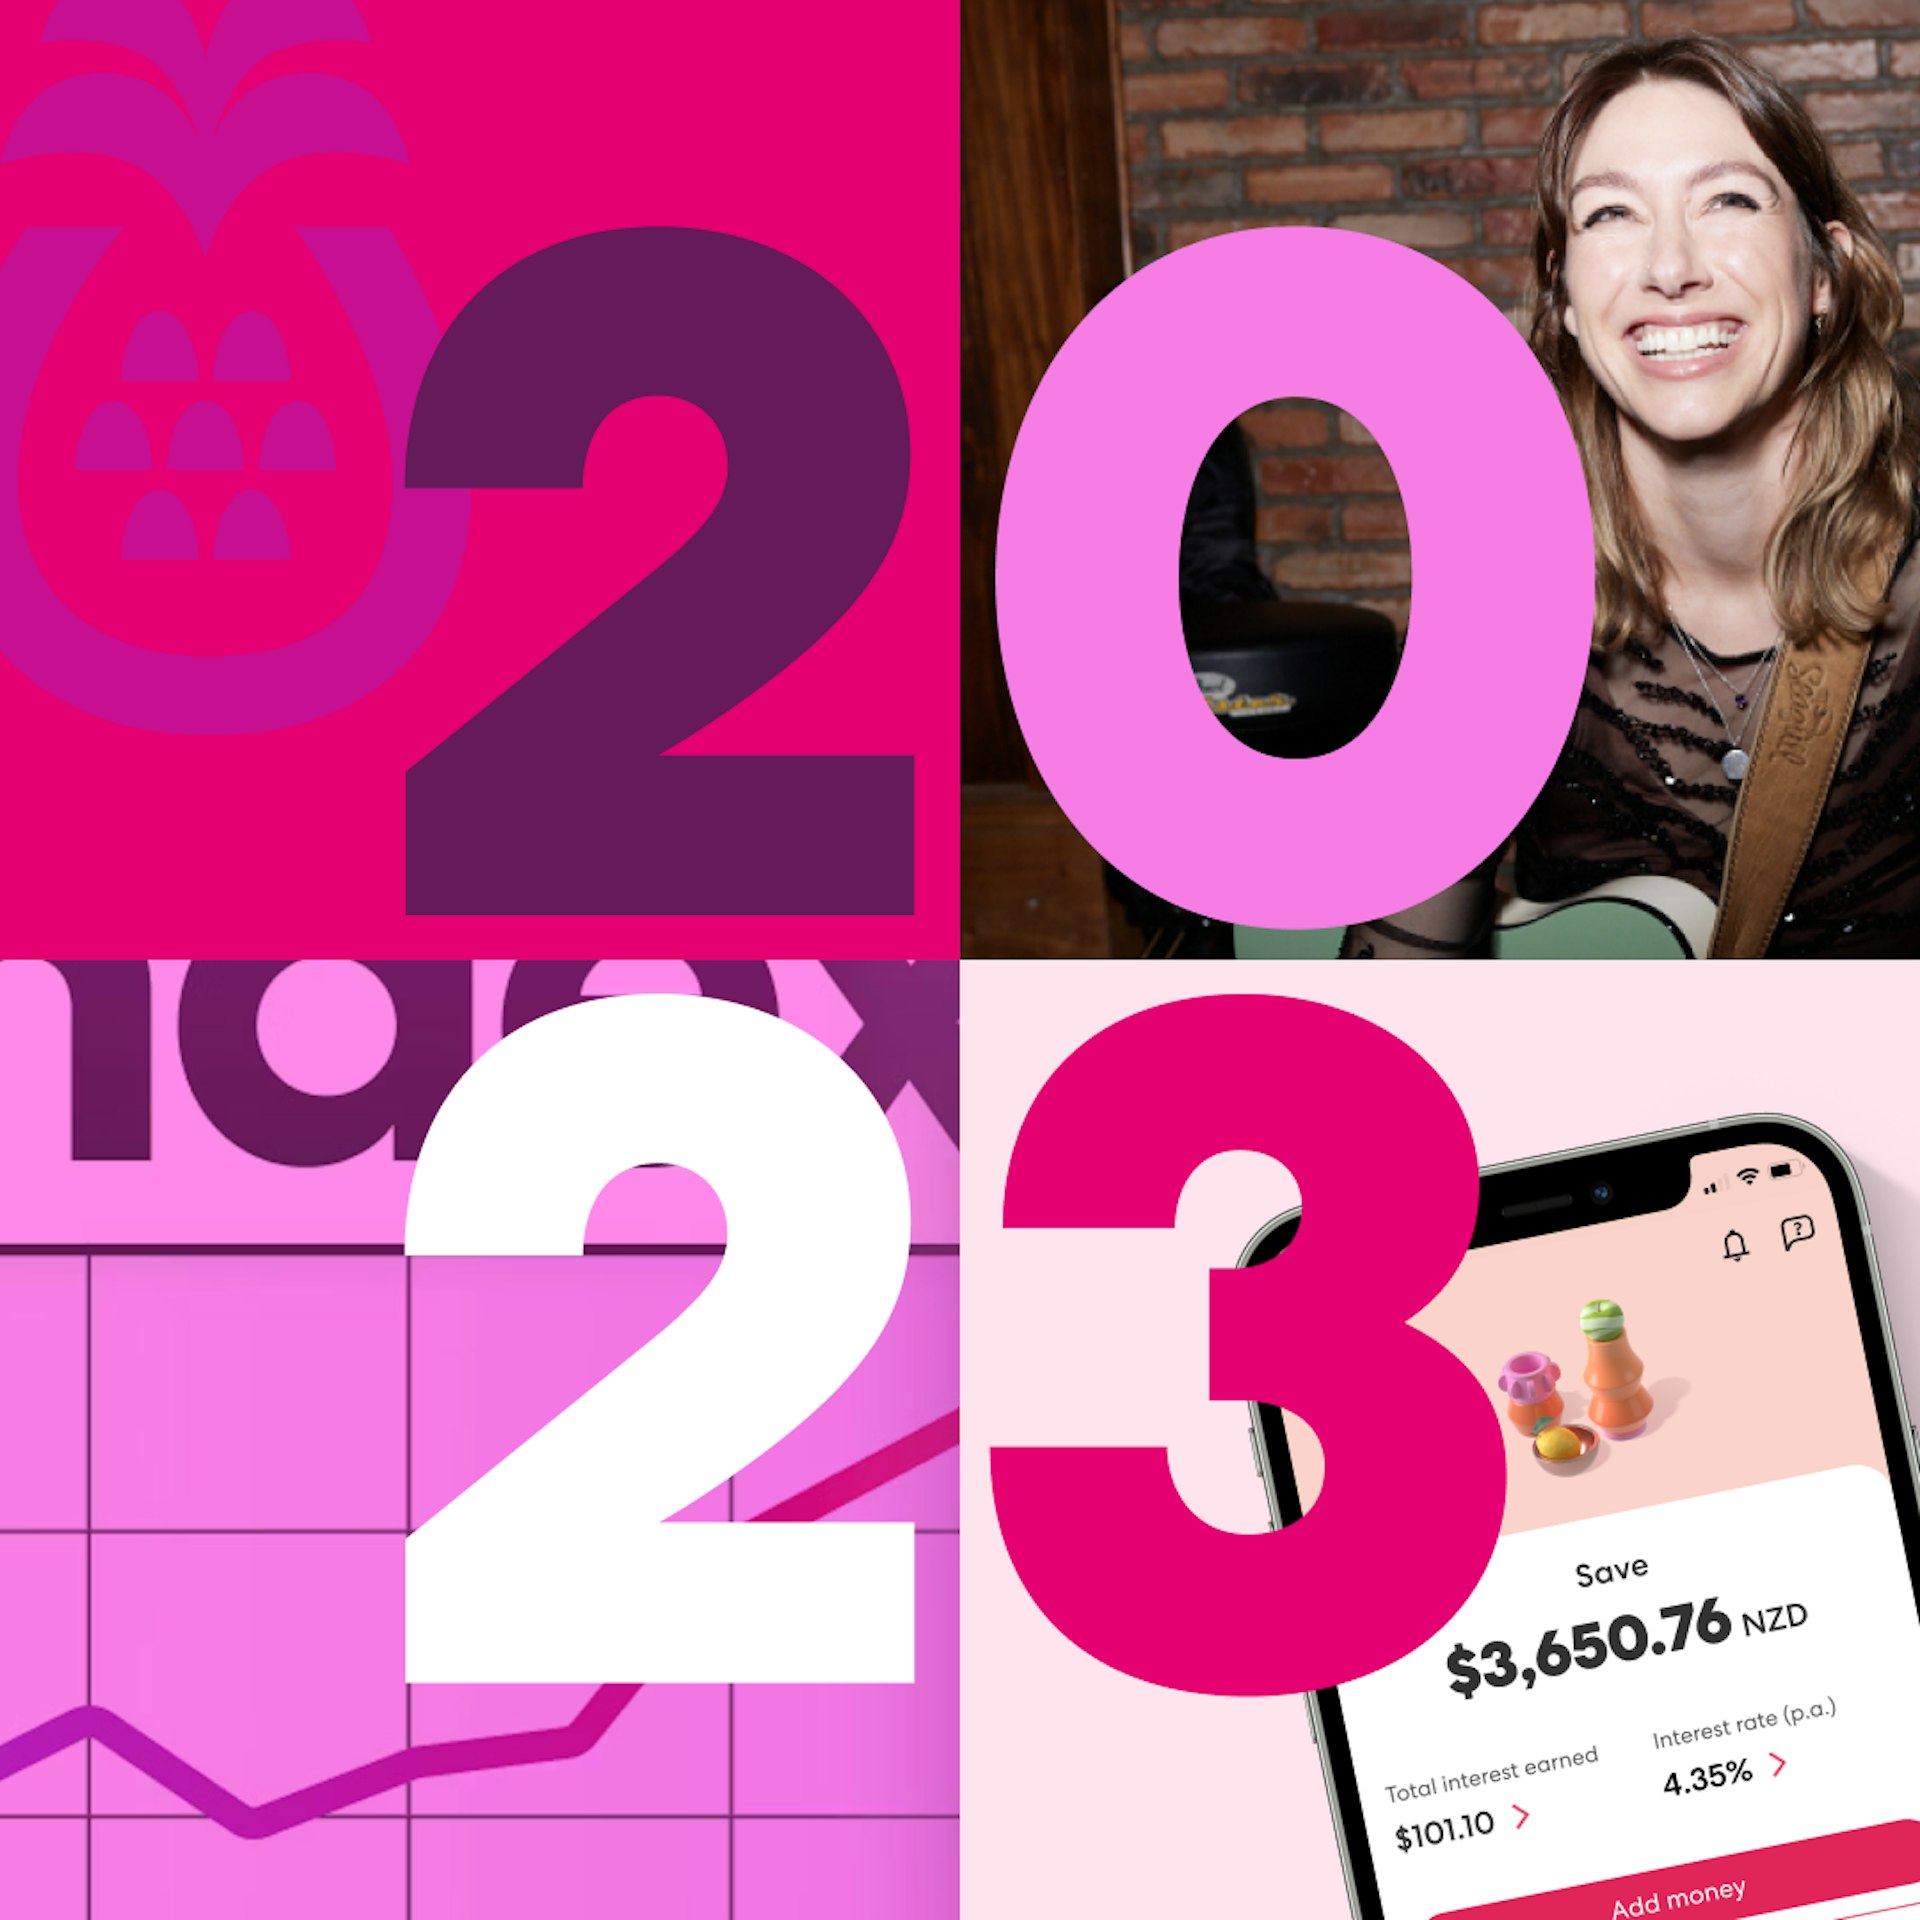 Numbers 2, 0, 2, and 3 are displayed on a grid. The background of each quarter shows an image relating to a Shaesies feature that was released during the year. 